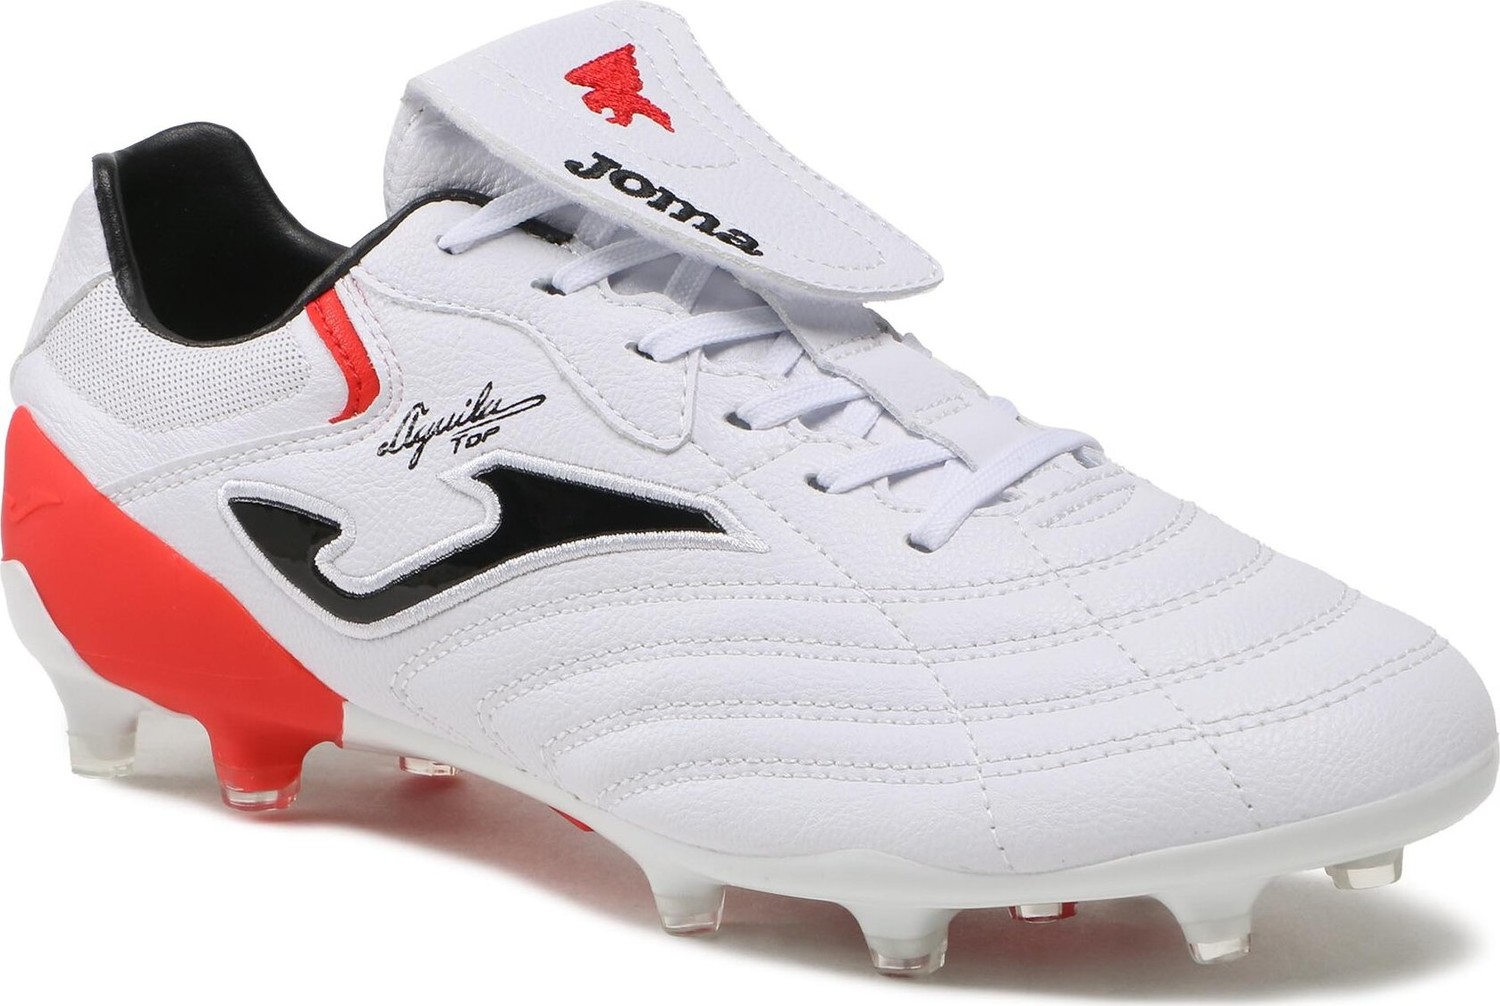 Boty Joma Aguila Cup 2302 ACUS2302FG White/Red